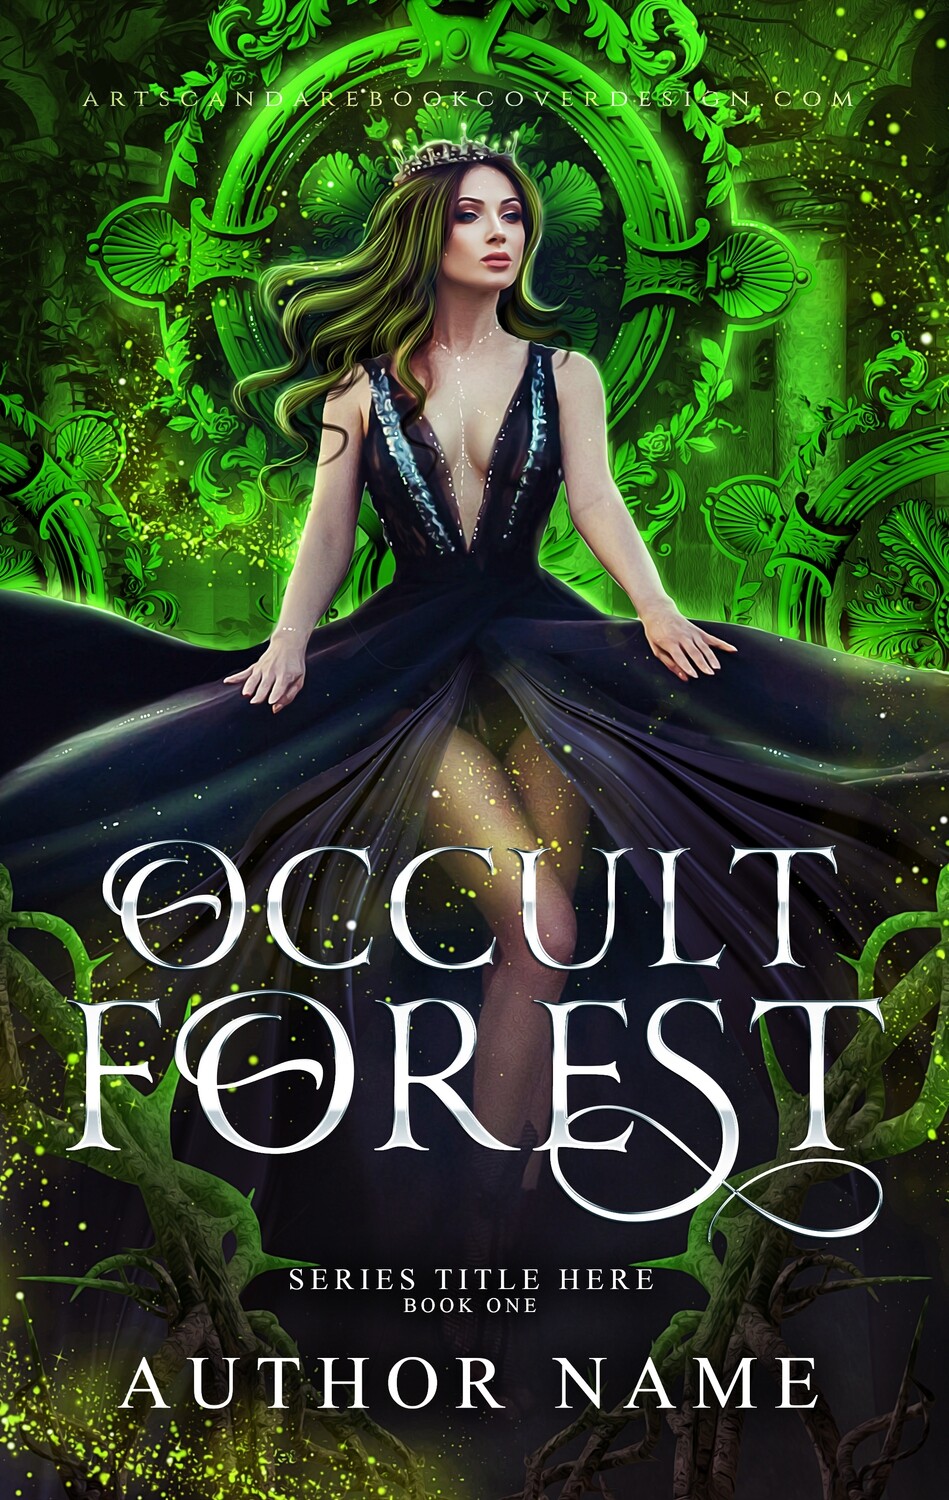 OCCULT FOREST